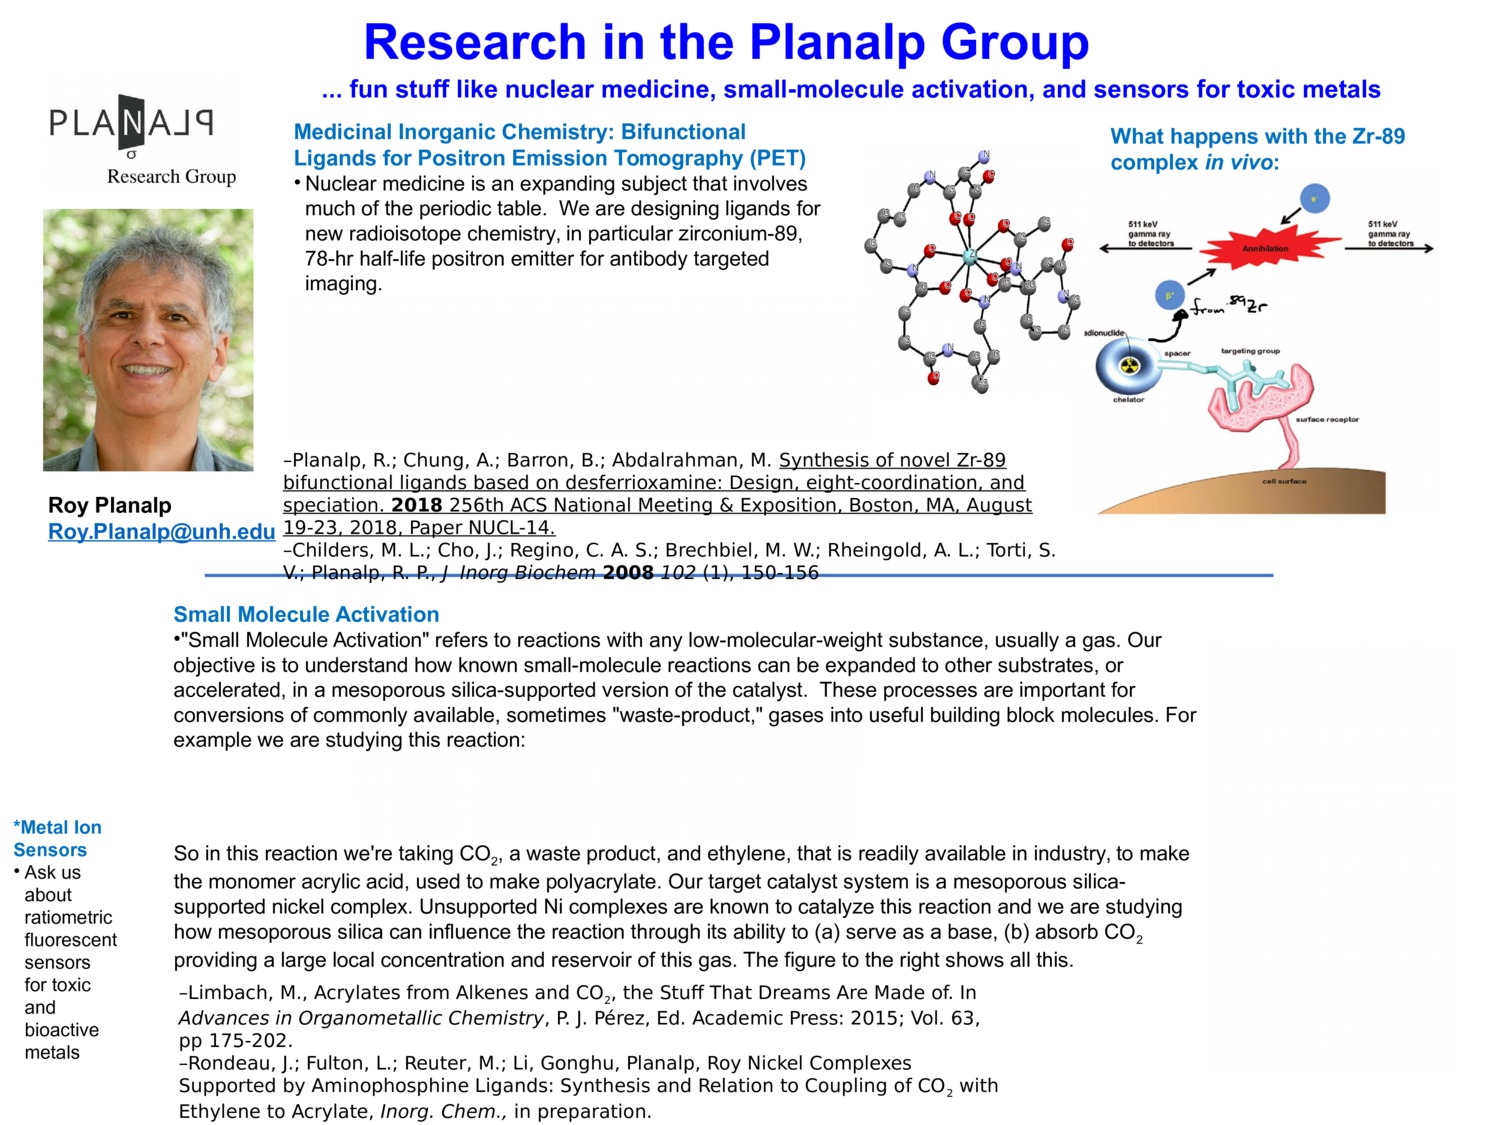 Research In The Planalp Group by planalp